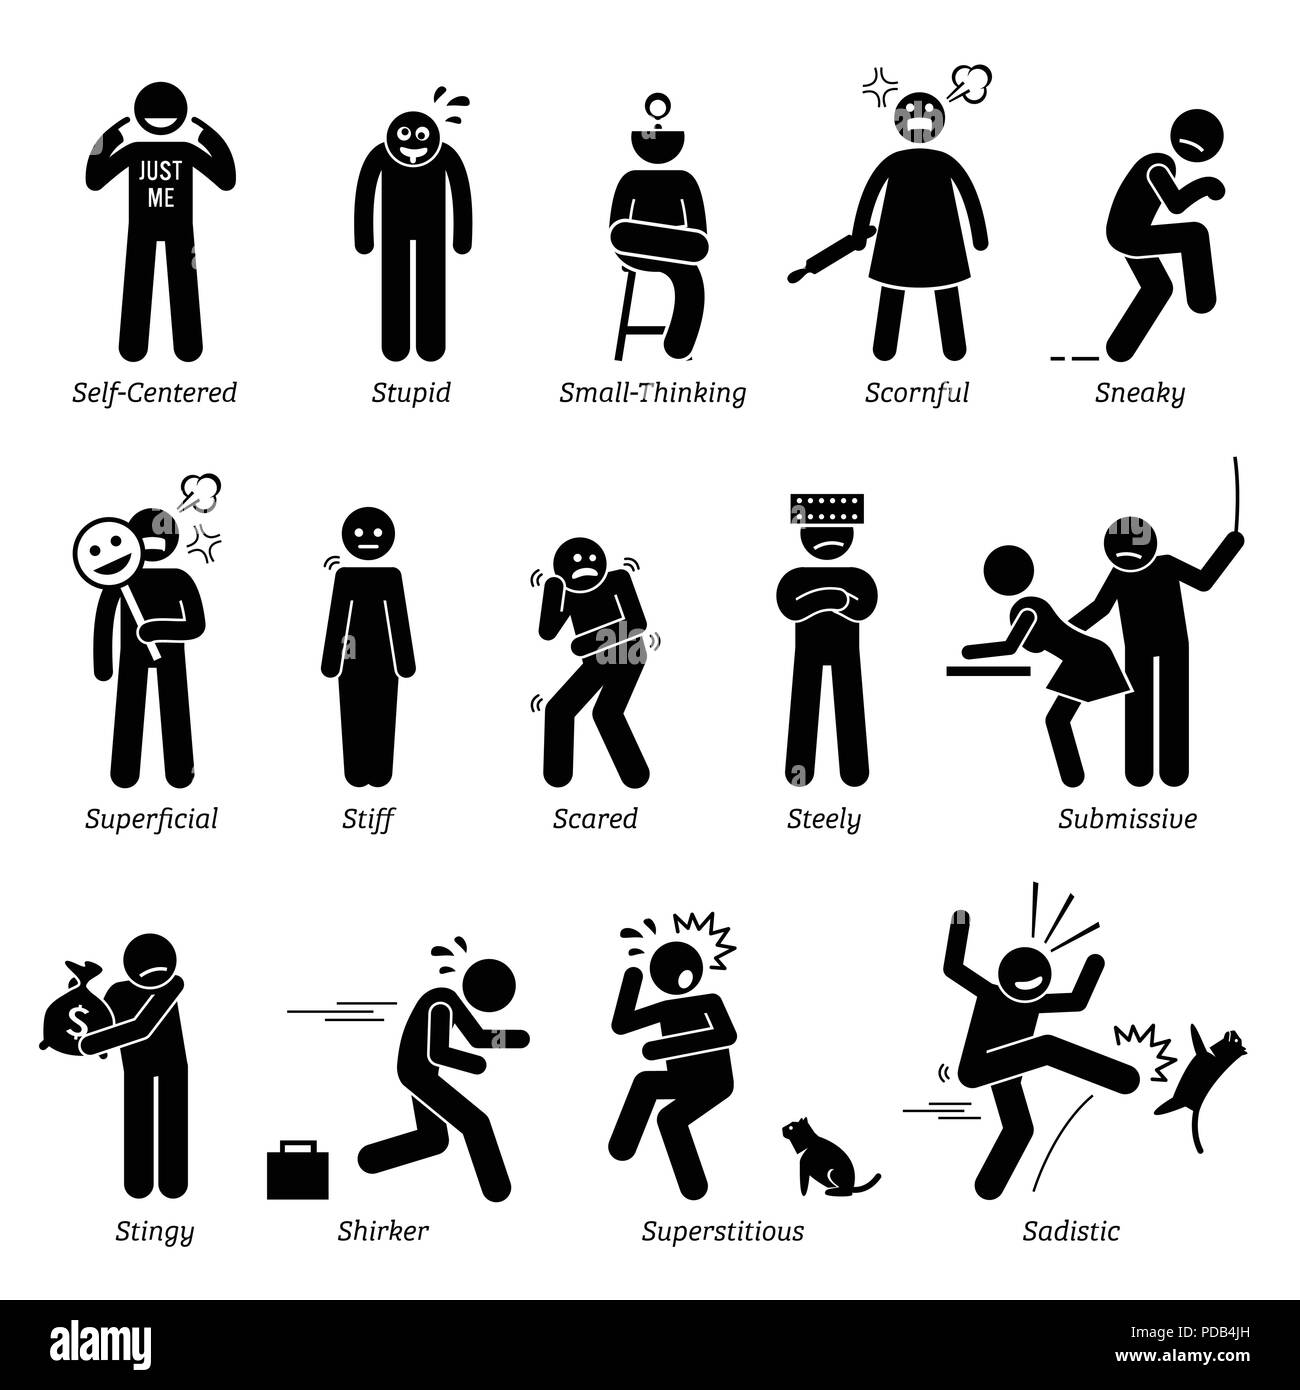 Negative Personalities Character Traits. Stick Figures Man Icons ...